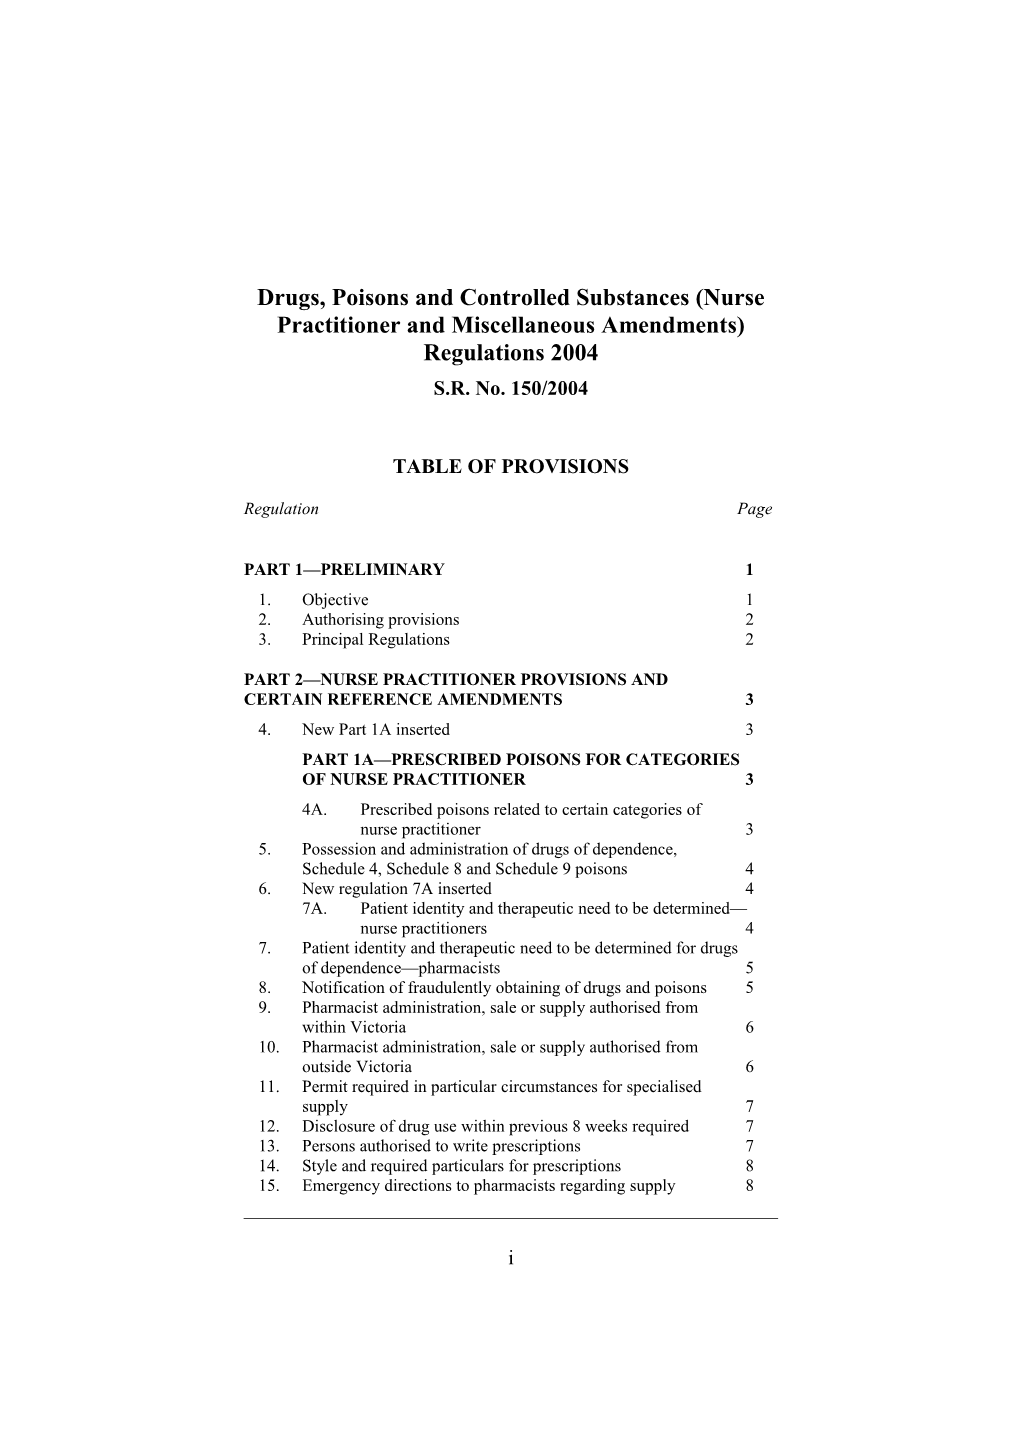 Drugs, Poisons and Controlled Substances (Nurse Practitioner and Miscellaneous Amendments)